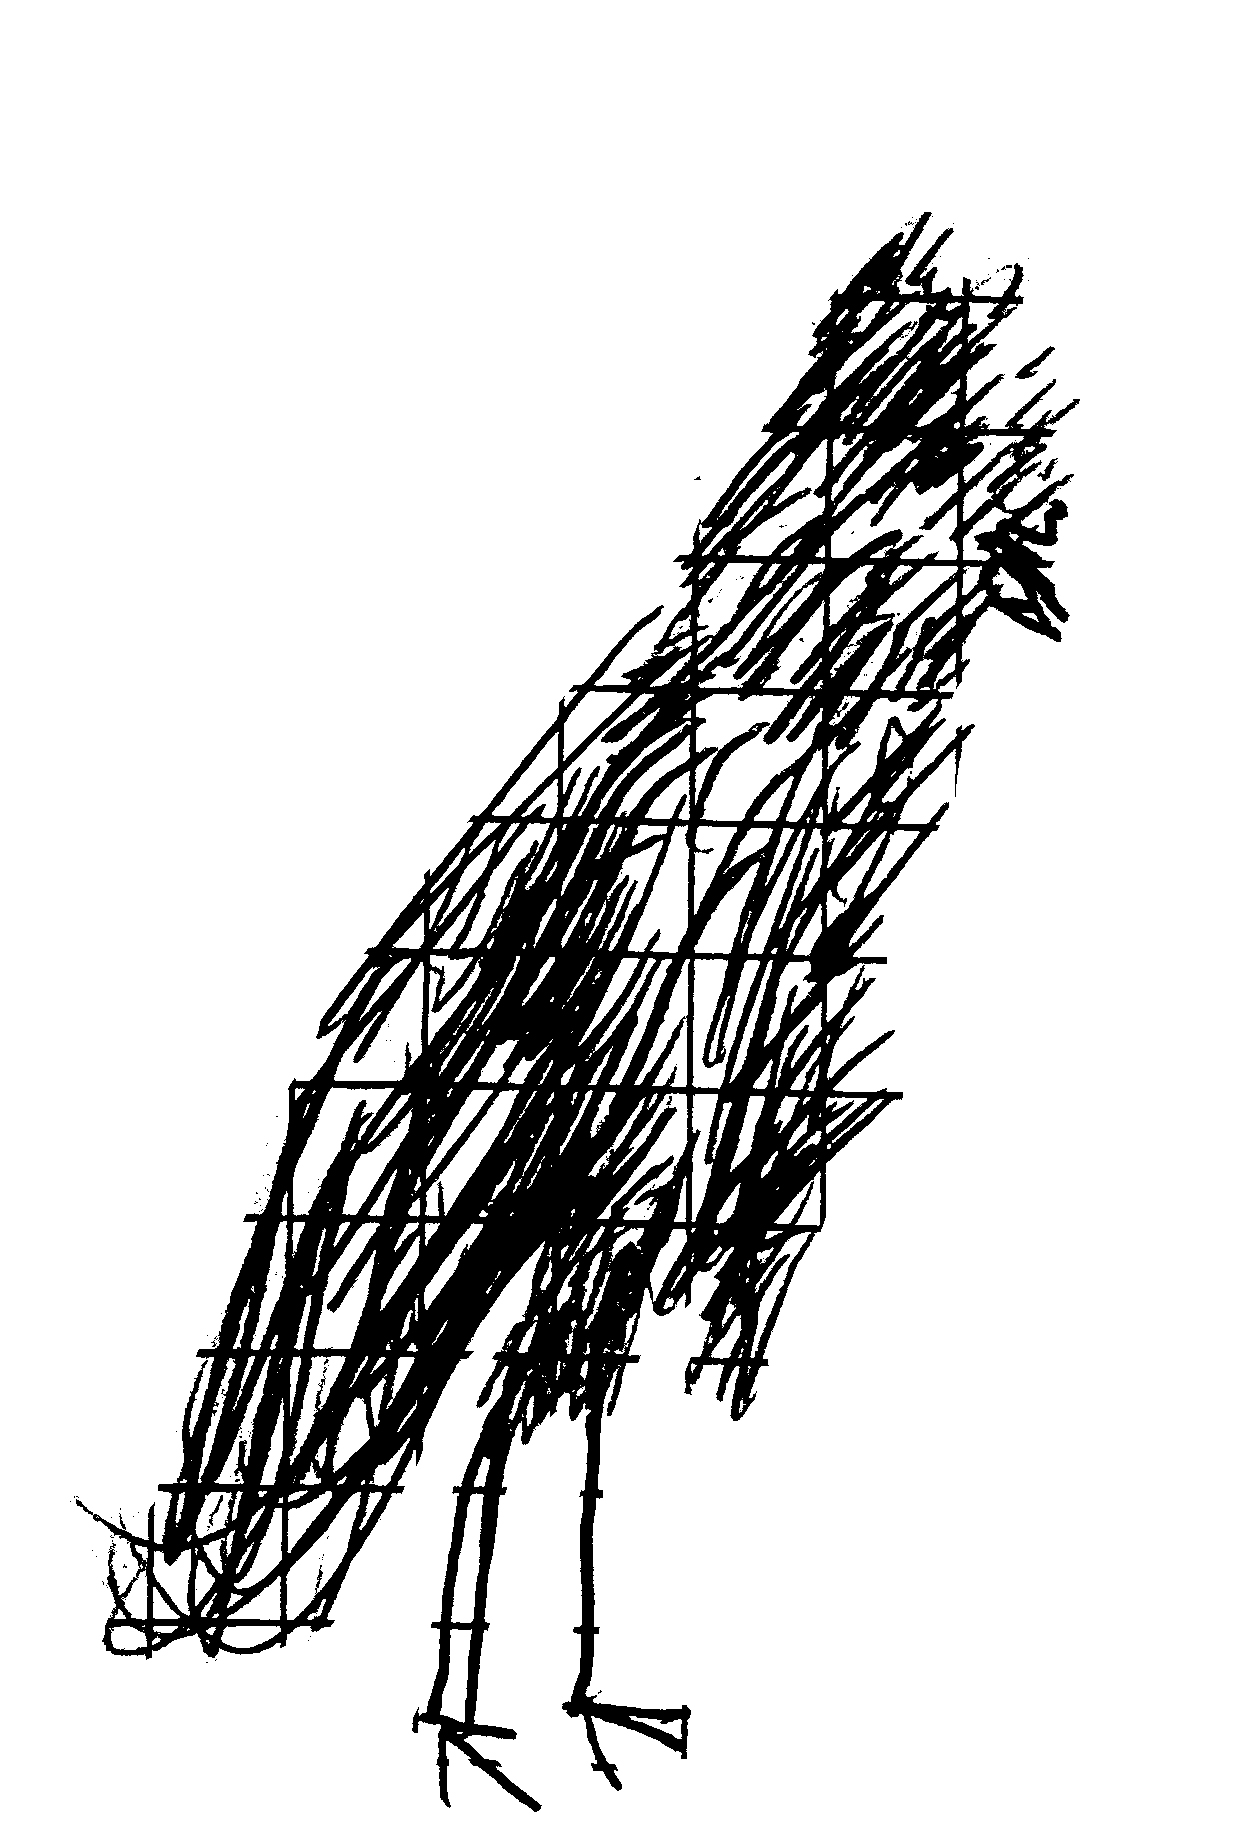 drawing with black lines of a bird, with a faint grid beneath the dense strokes